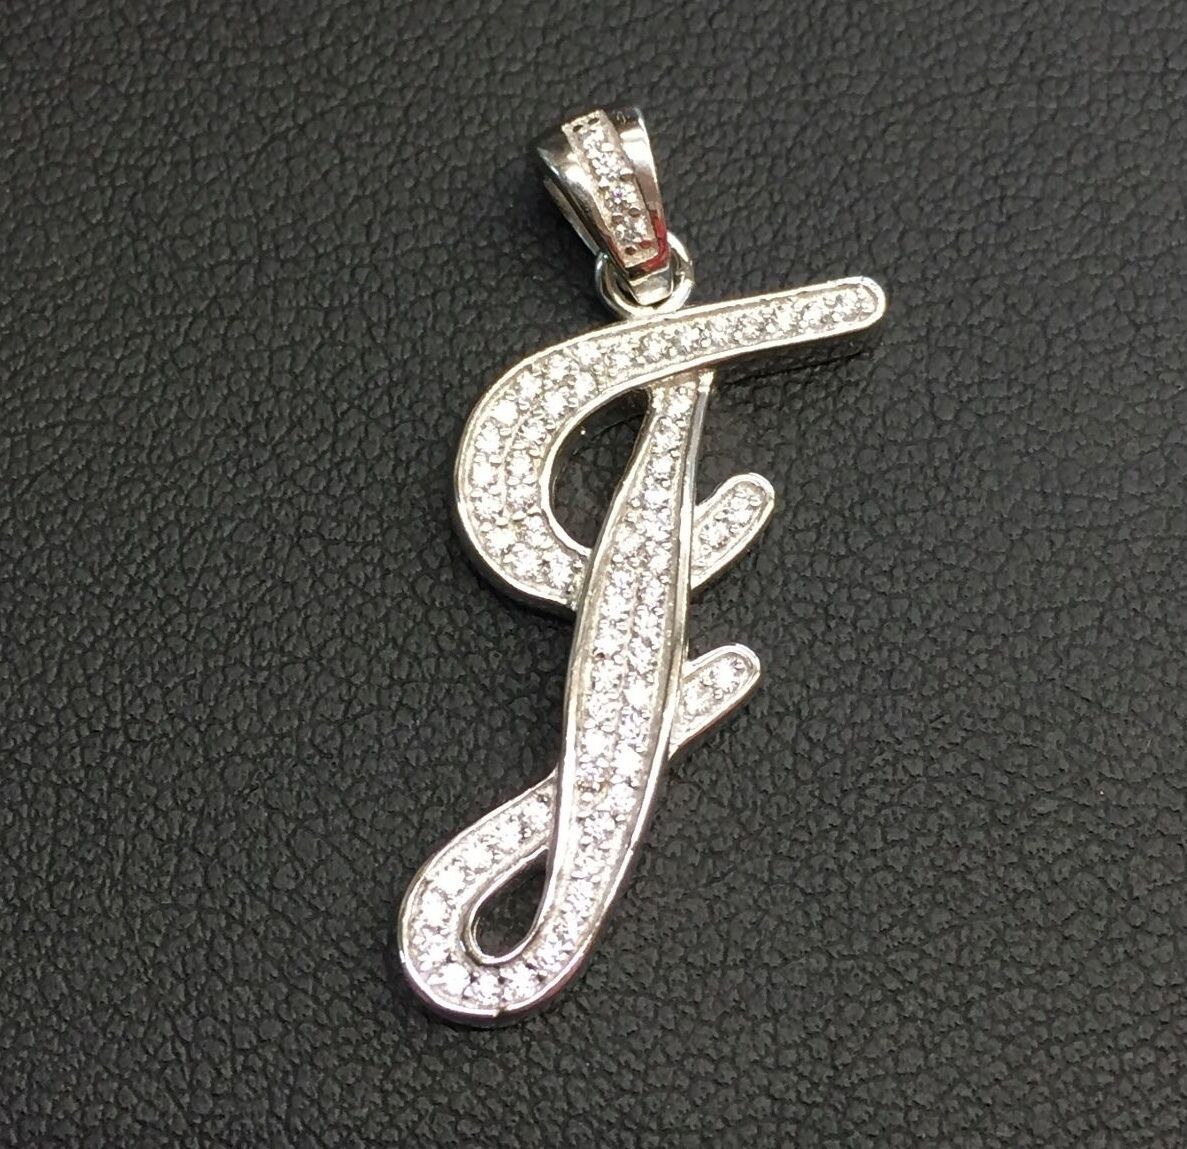 Primary image for NEW!! 925 Sterling Silver CZ Letter Initial "I" Pendant Necklace